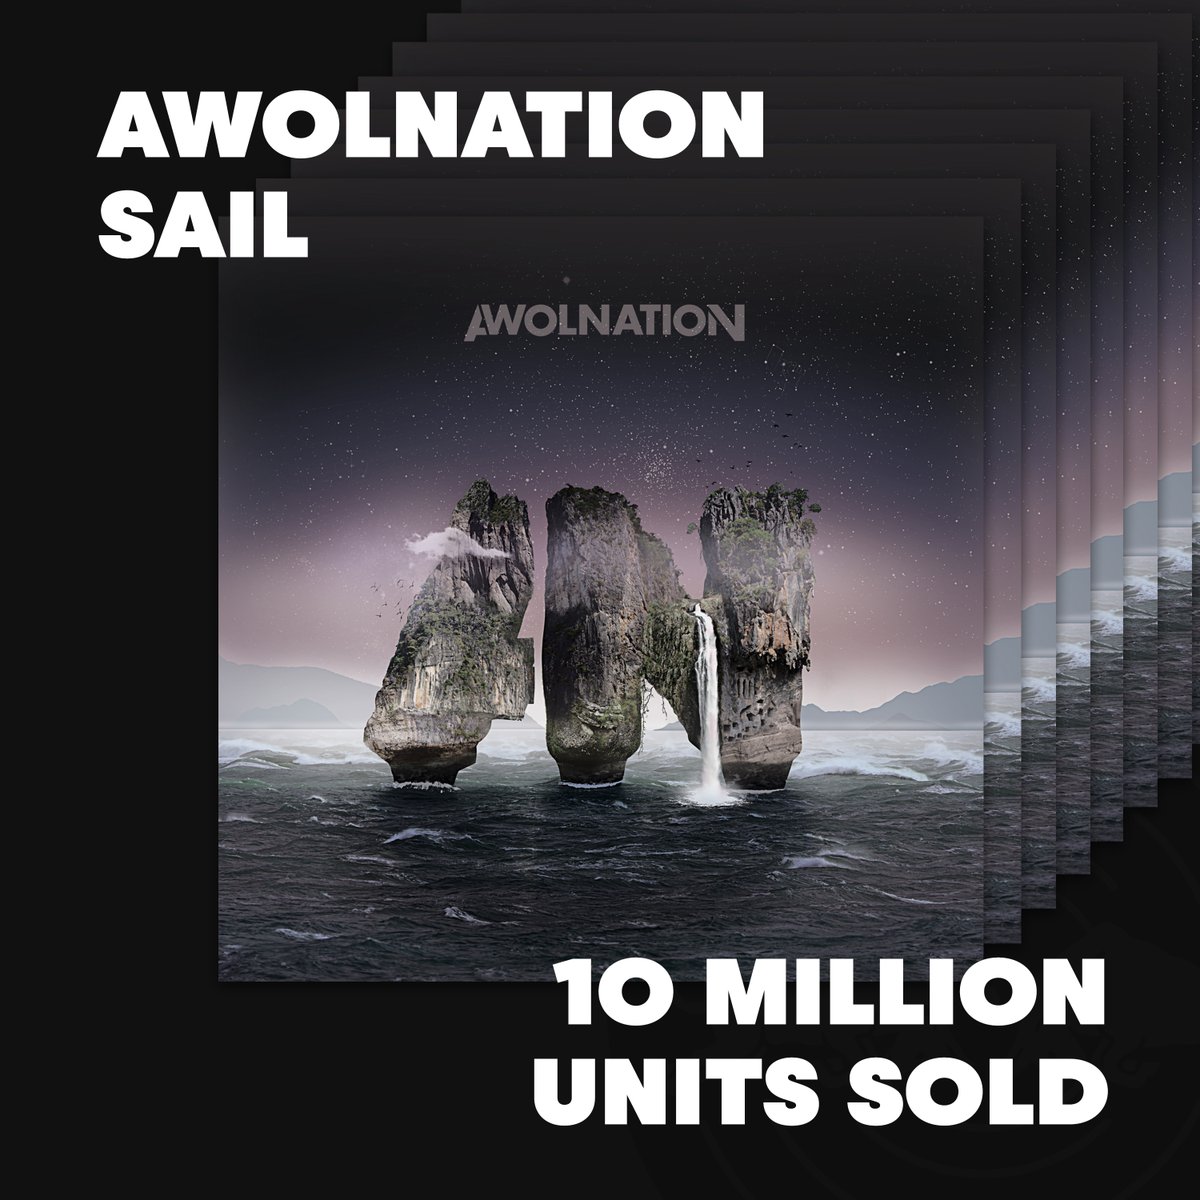 .@awolnation's song Sail has officially gone diamond! Sail is one of three independently distributed diamond-certified songs in history and is the 57th song overall to be certified diamond.